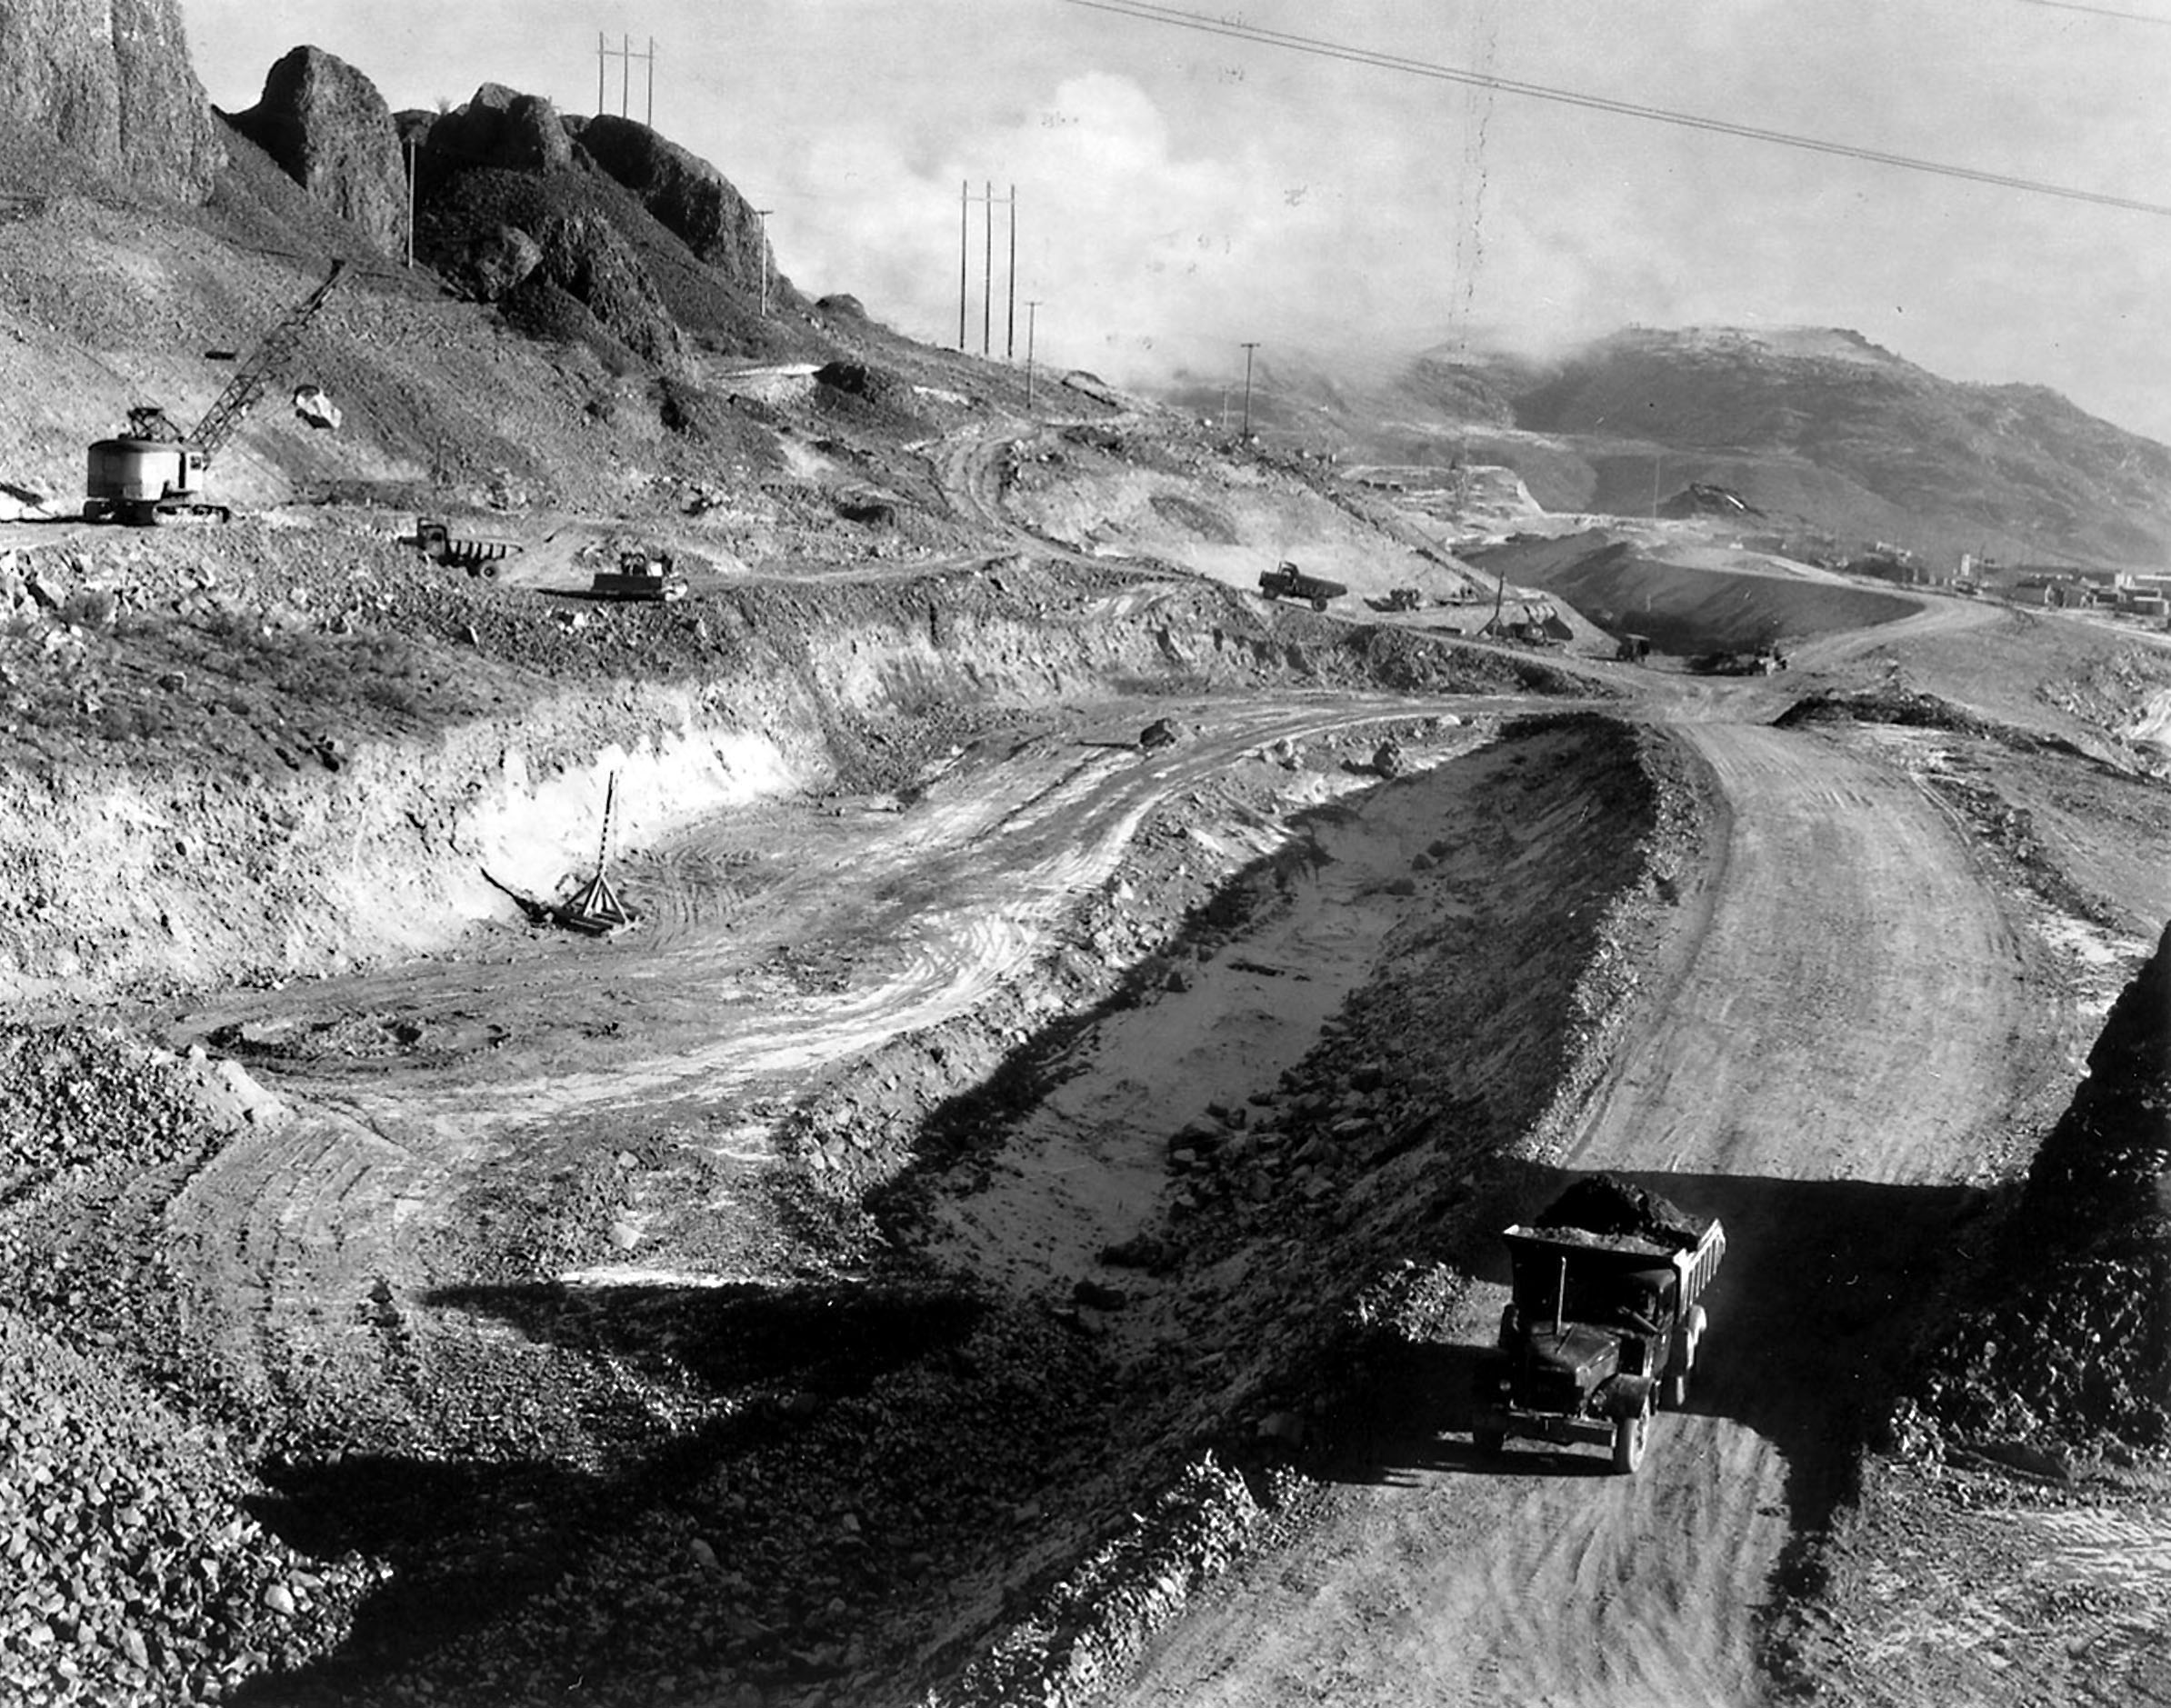 December 19, 1946. Excavation for the feeder canal at Grand Coulee Dam.